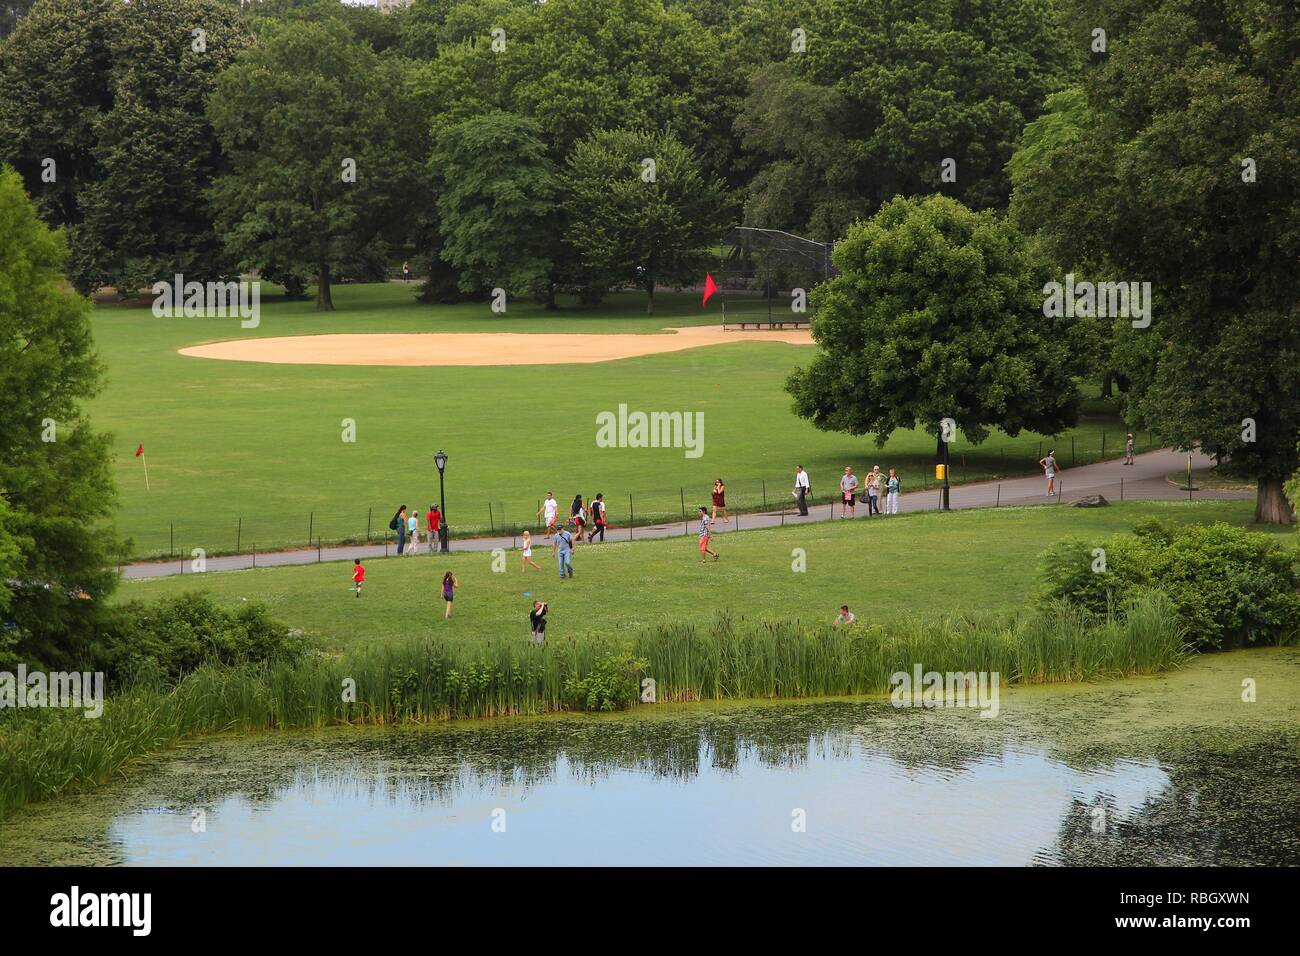 NEW YORK, USA - JULY 2, 2013: People visit Central Park in New York. Park opened in 1857 and covers 840 acres of land today. Stock Photo